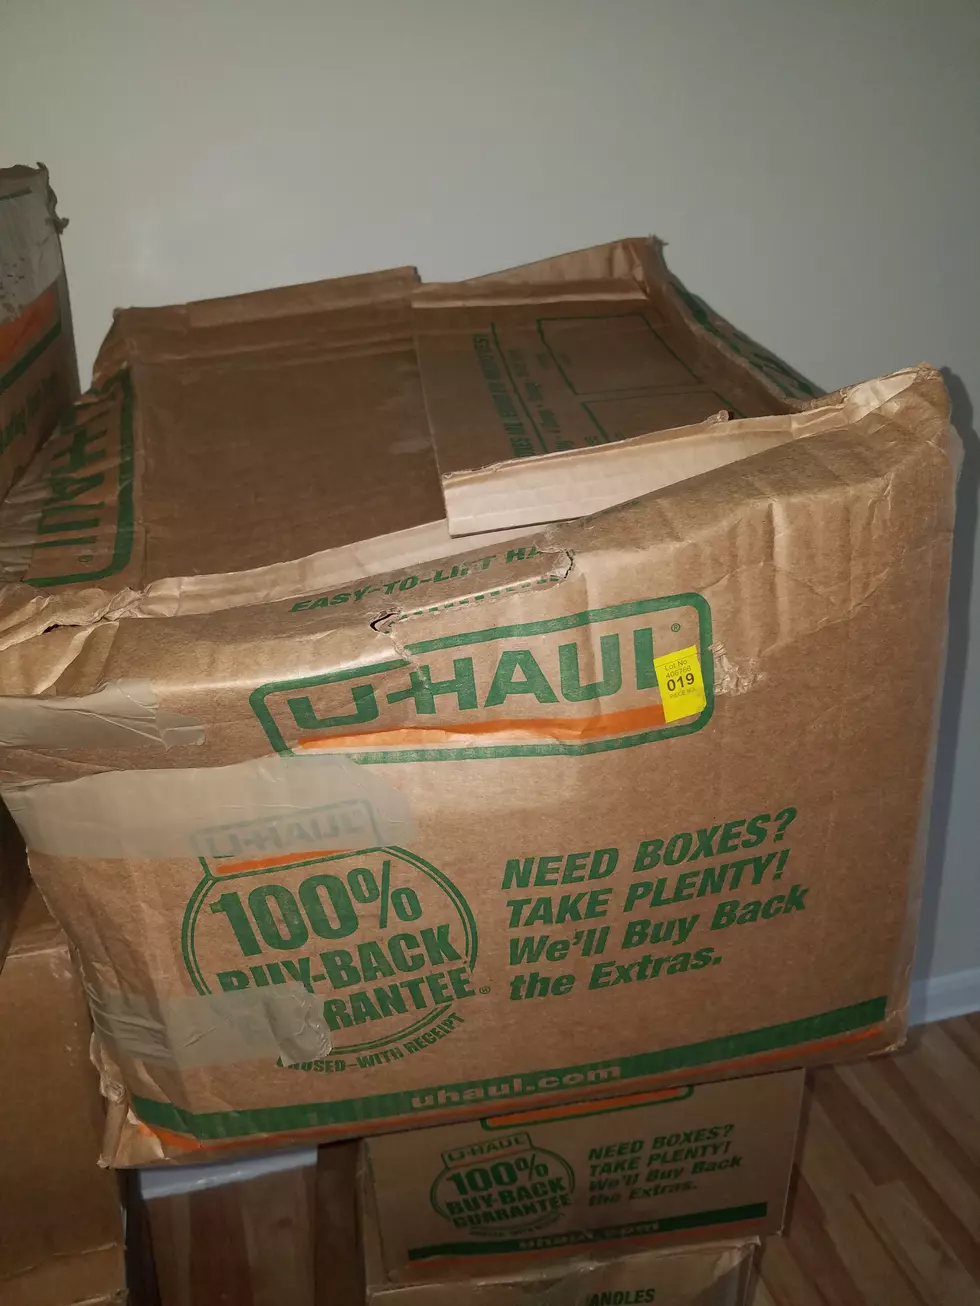 The Joys Of Moving: Seriously, Look at This Box!